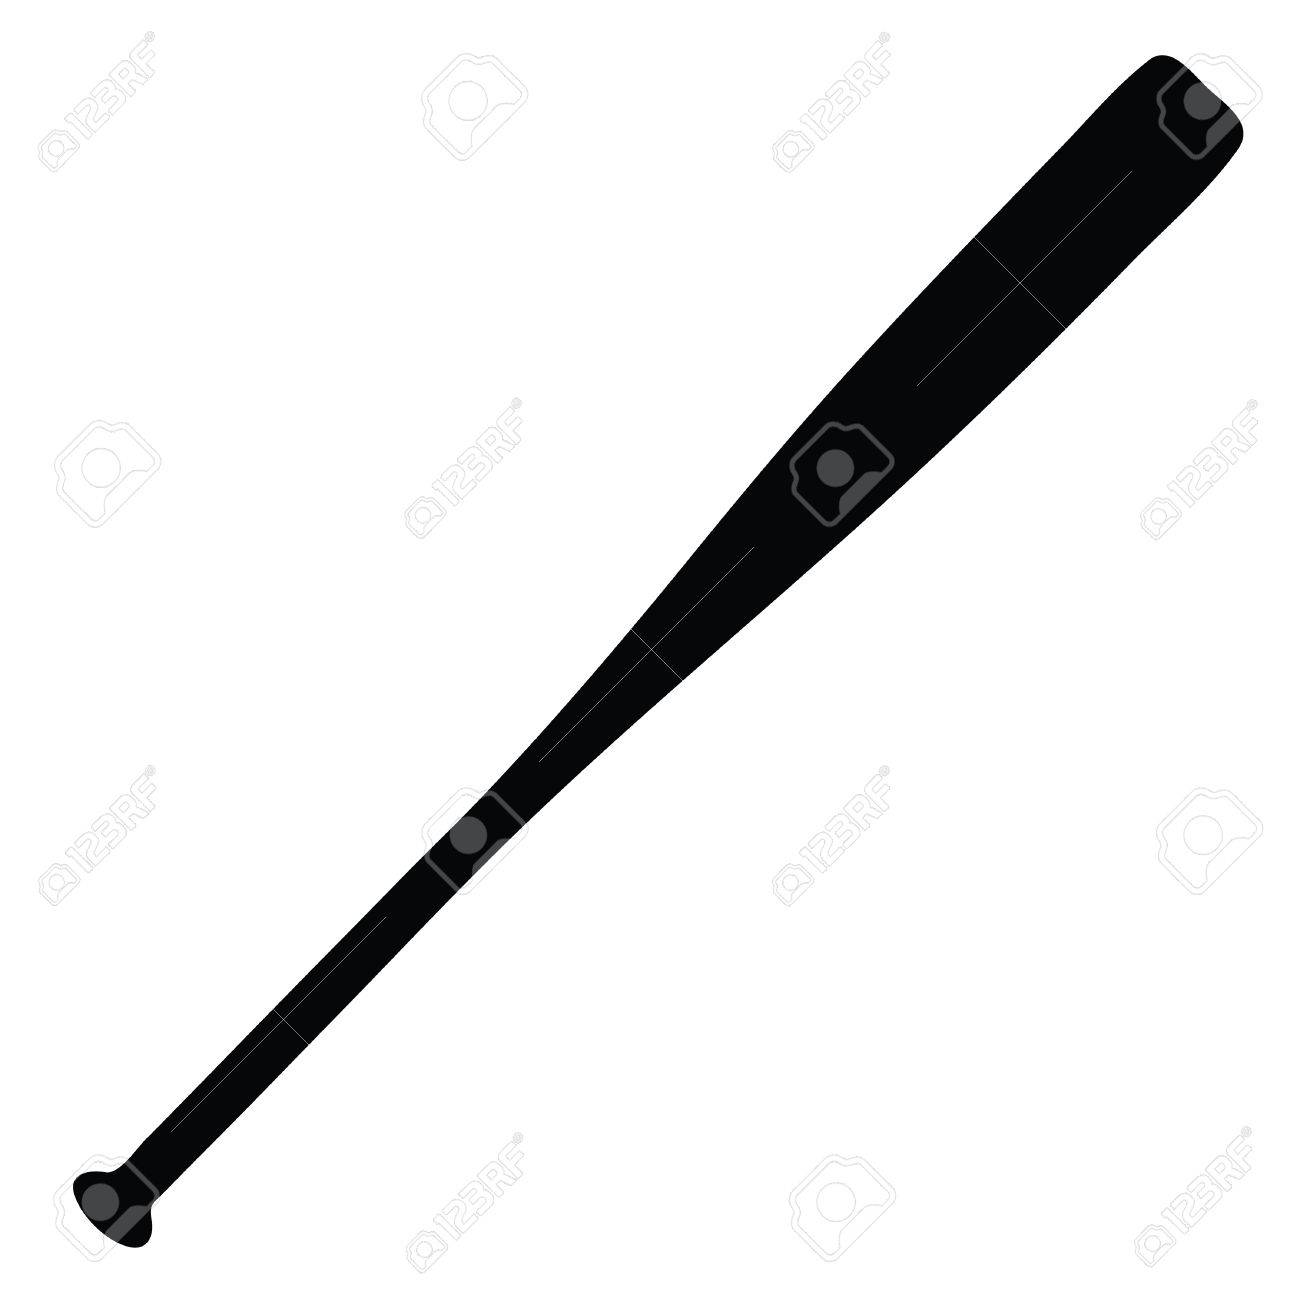 A black and white silhouette of a baseball bat.